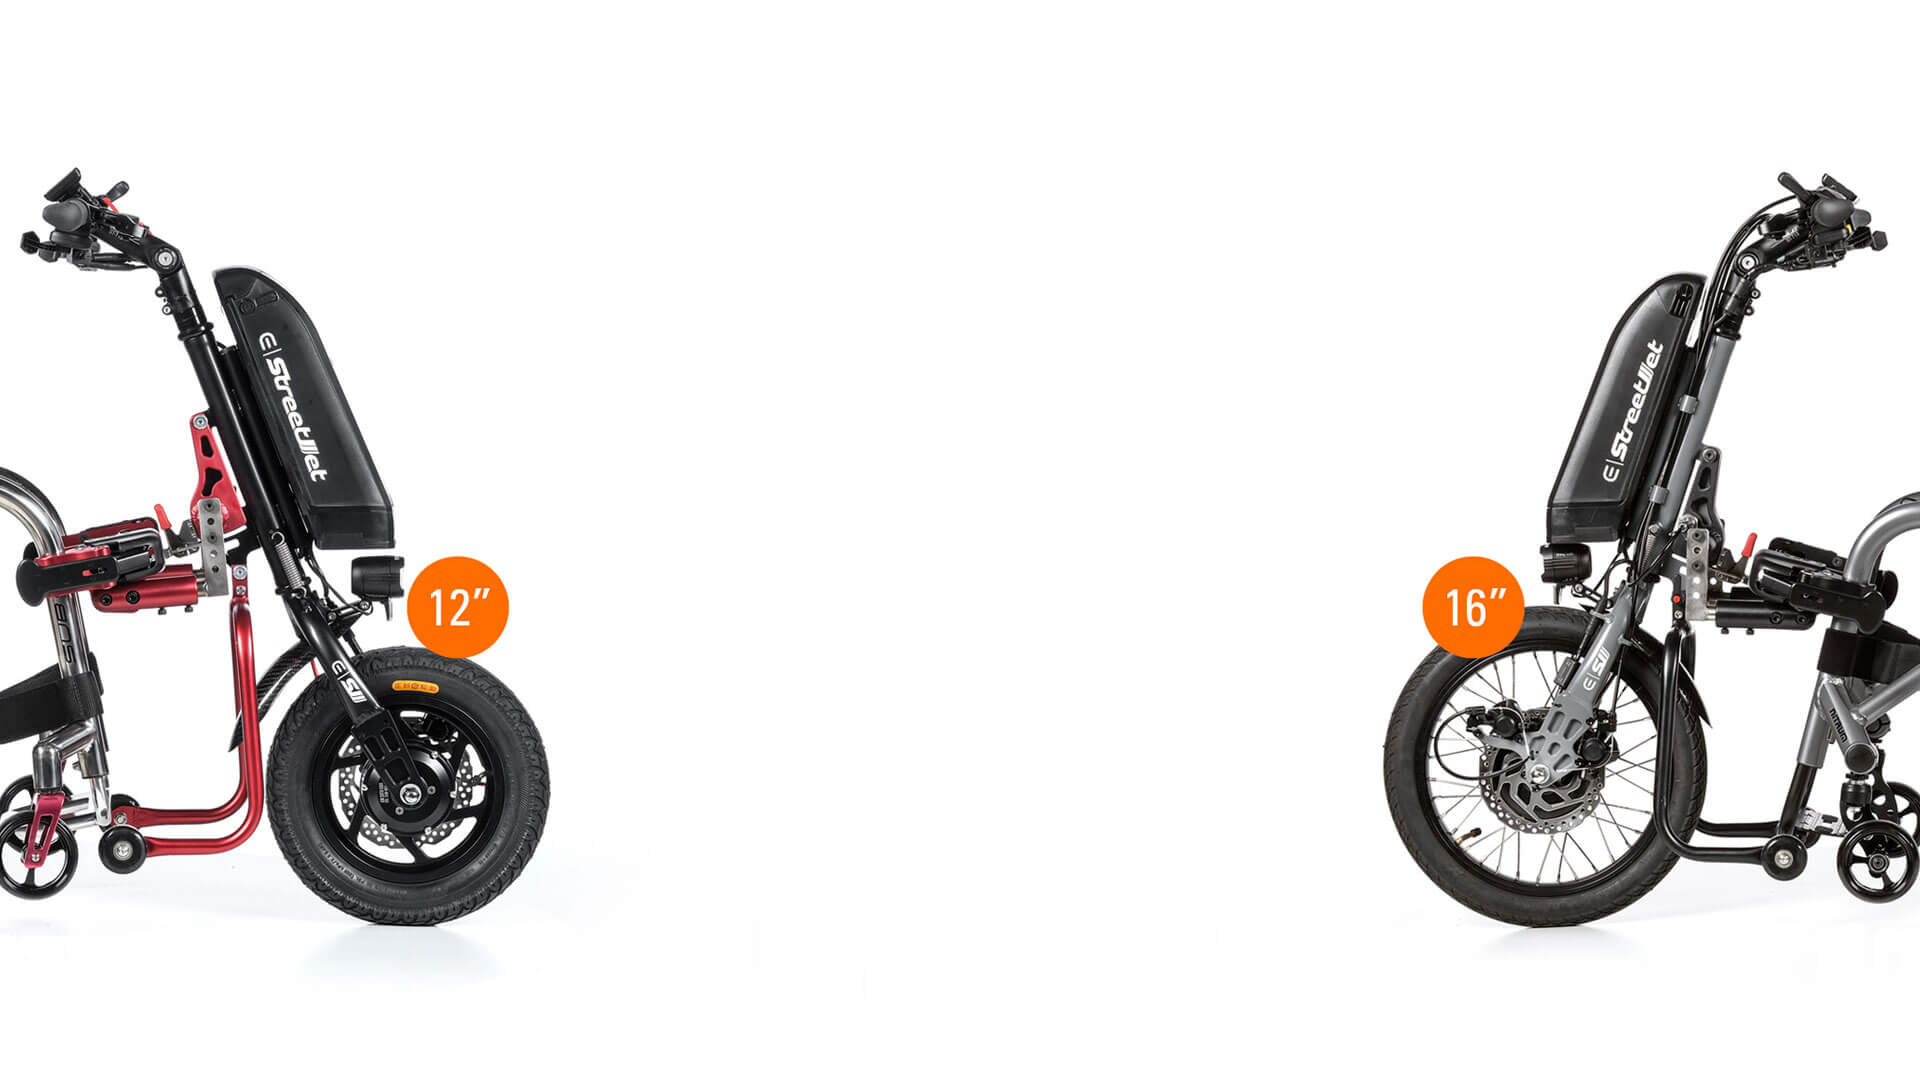 Which wheel size will you choose?